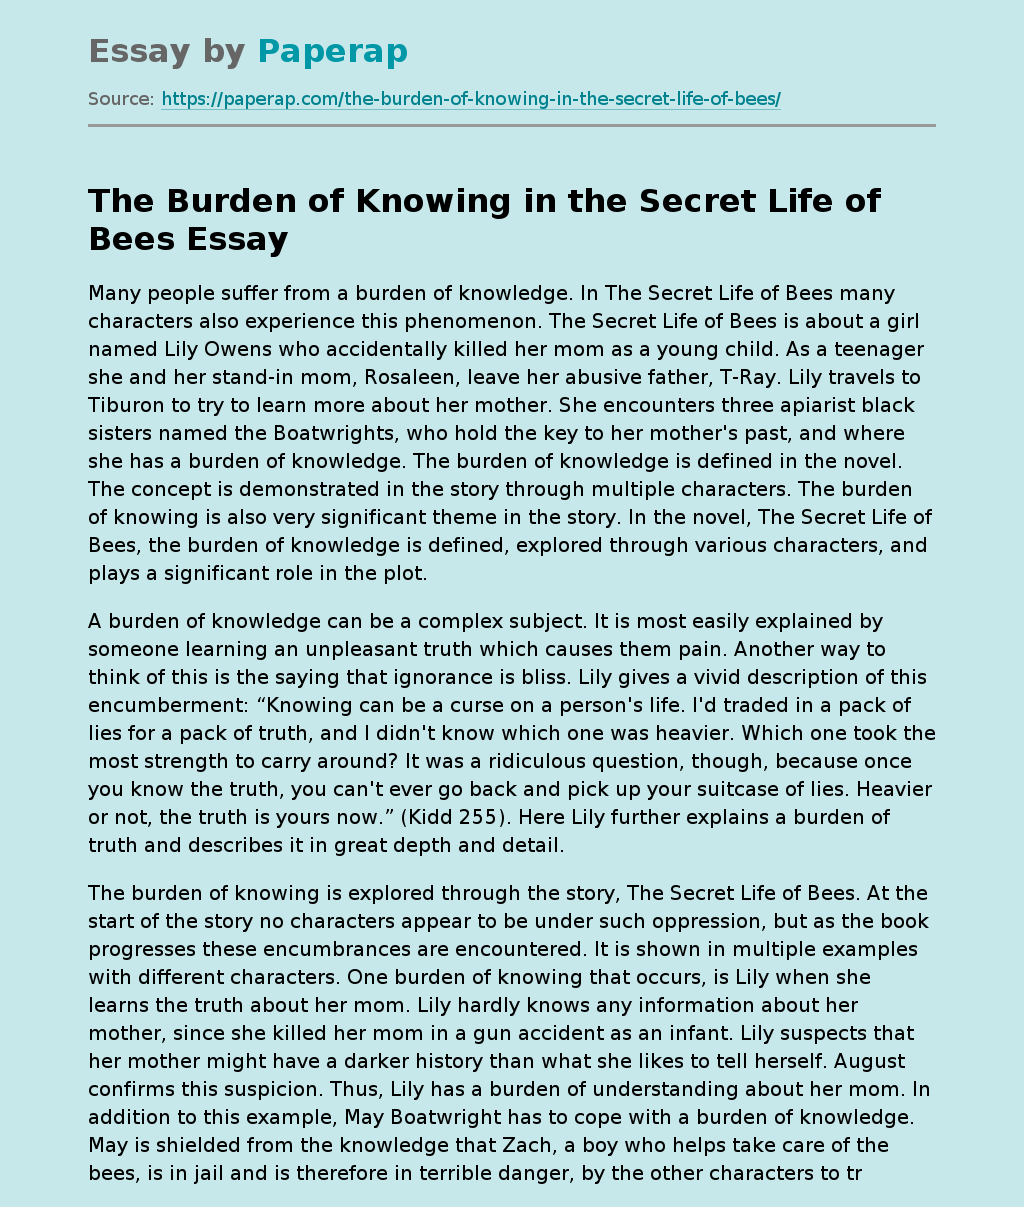 The Burden of Knowing in the Secret Life of Bees